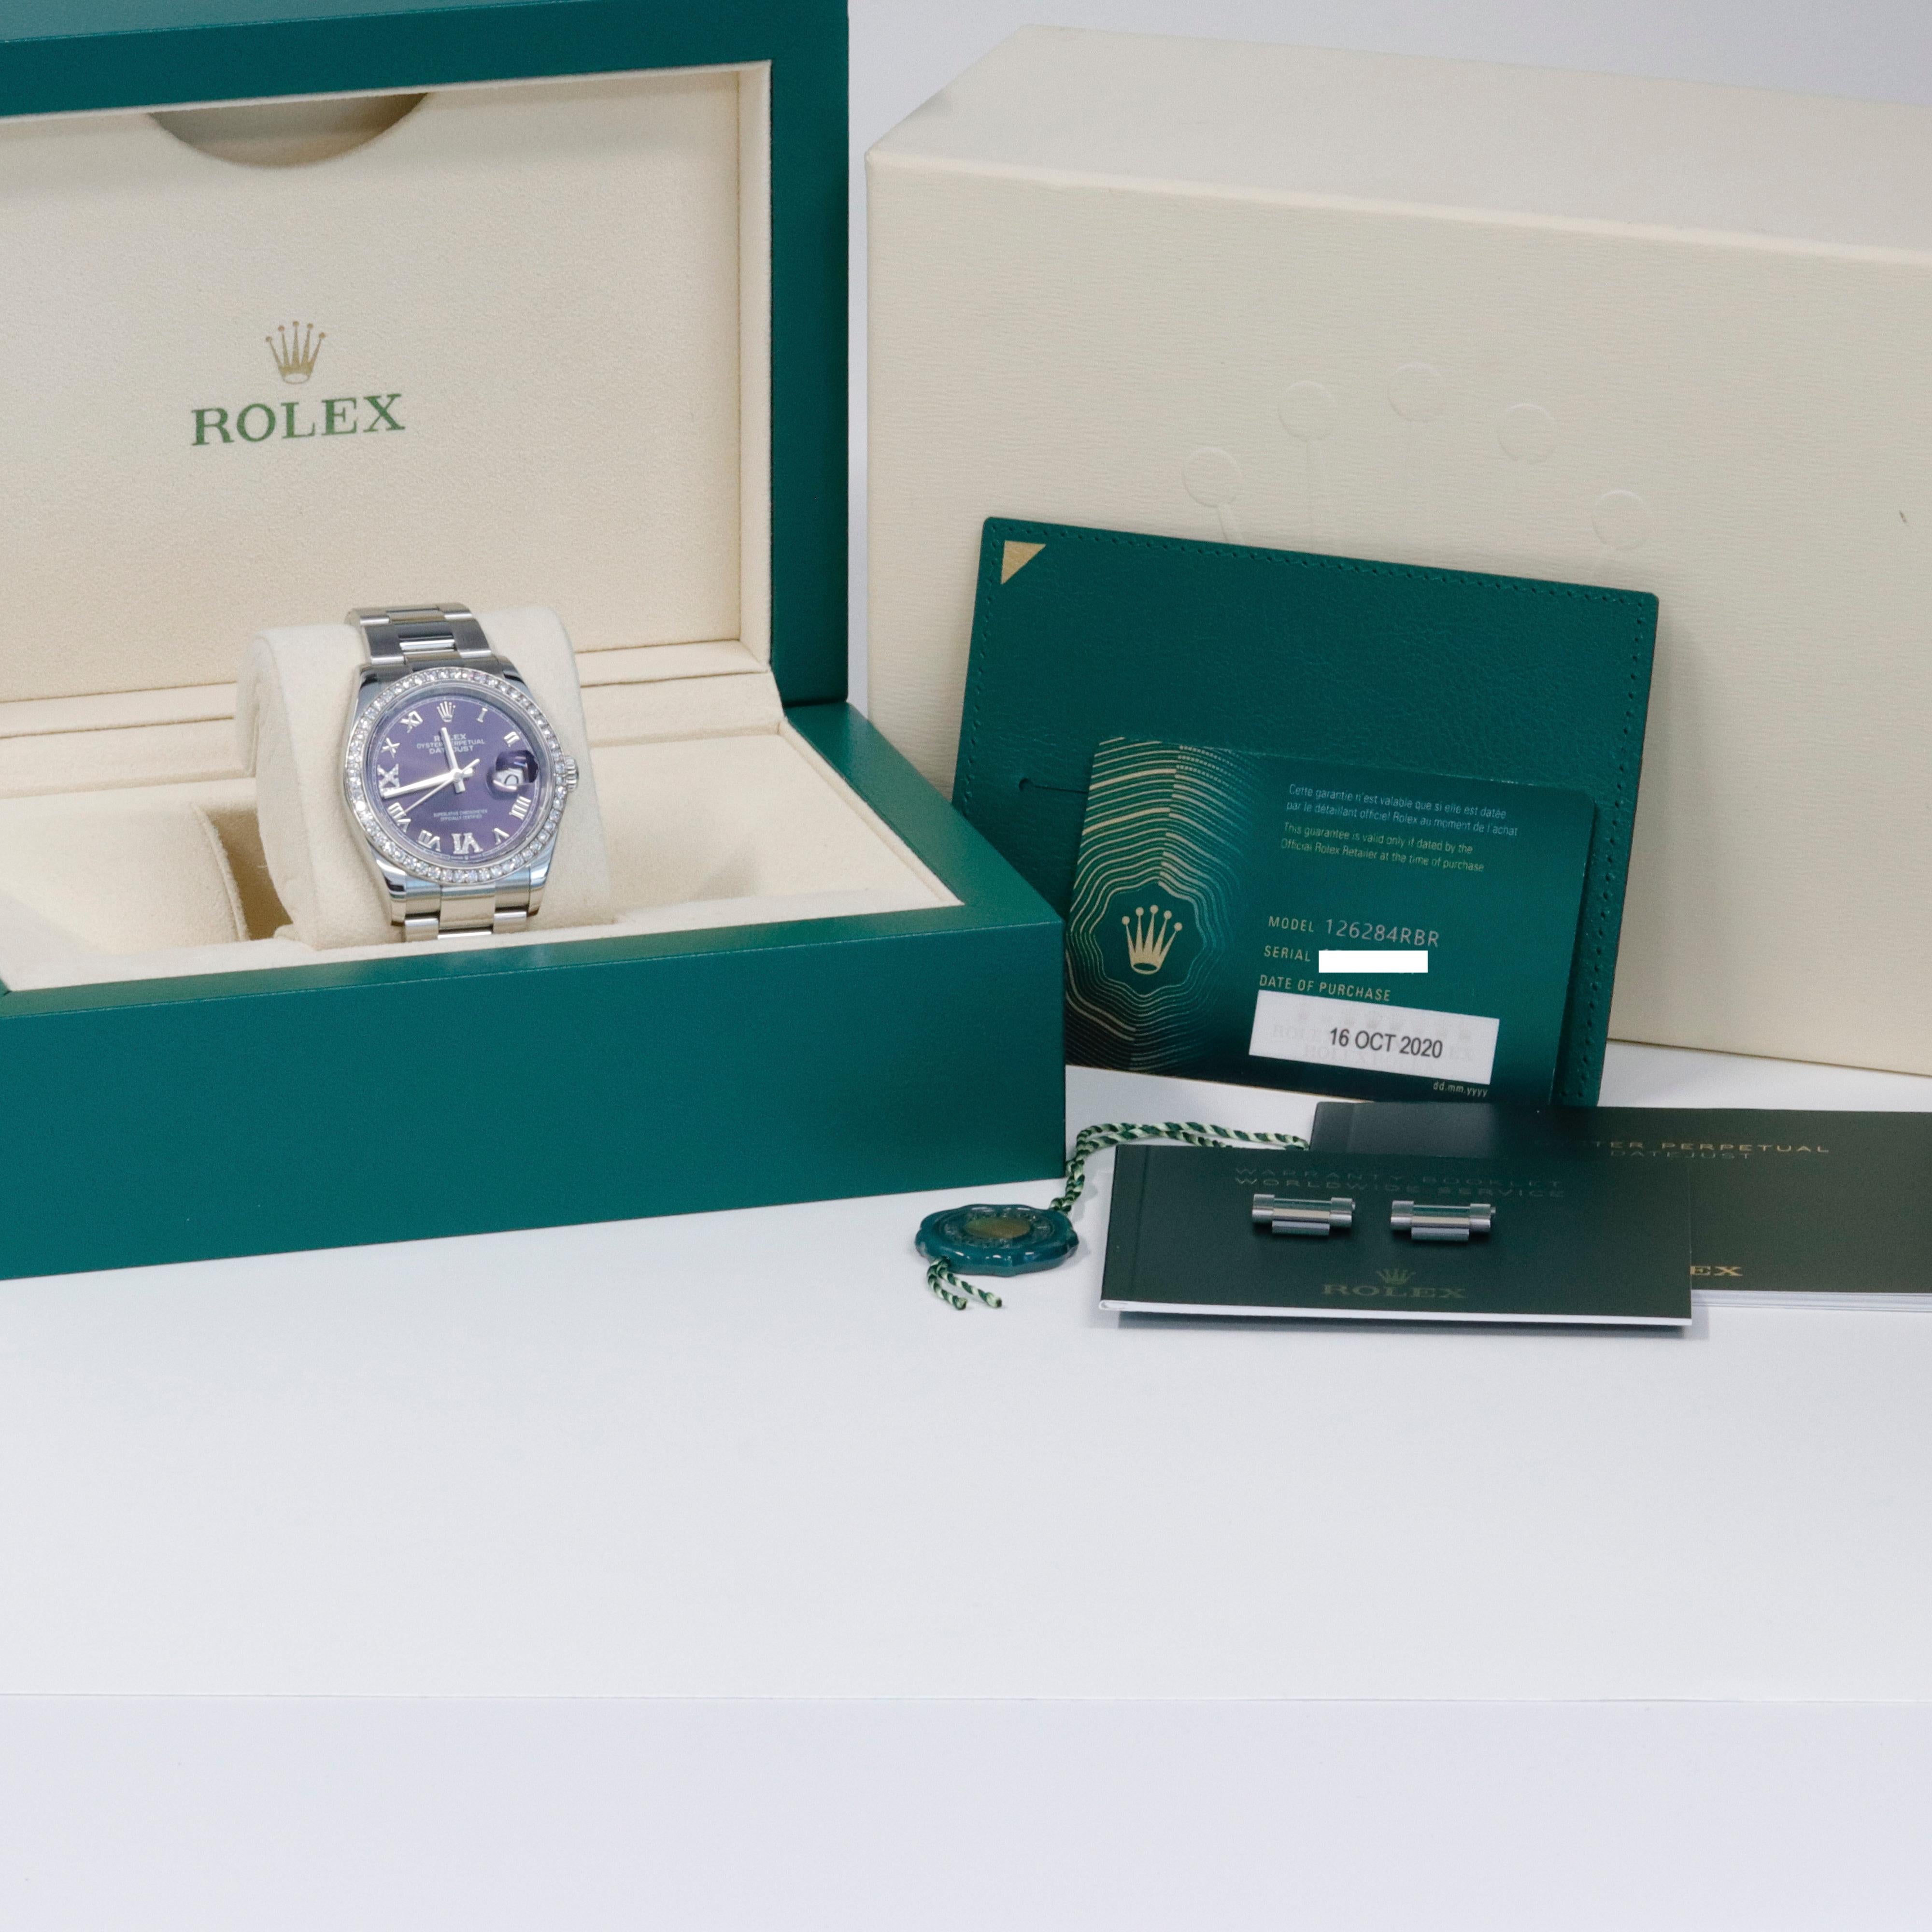 The exclusive factory diamond bezel and diamond dial 36mm aubergine purple Rolex Datejust ( Model # 126284RBR ) is the perfect every day watch, that wears casually or formally. 

The original deep purple dial gives subtle hints of color, with the